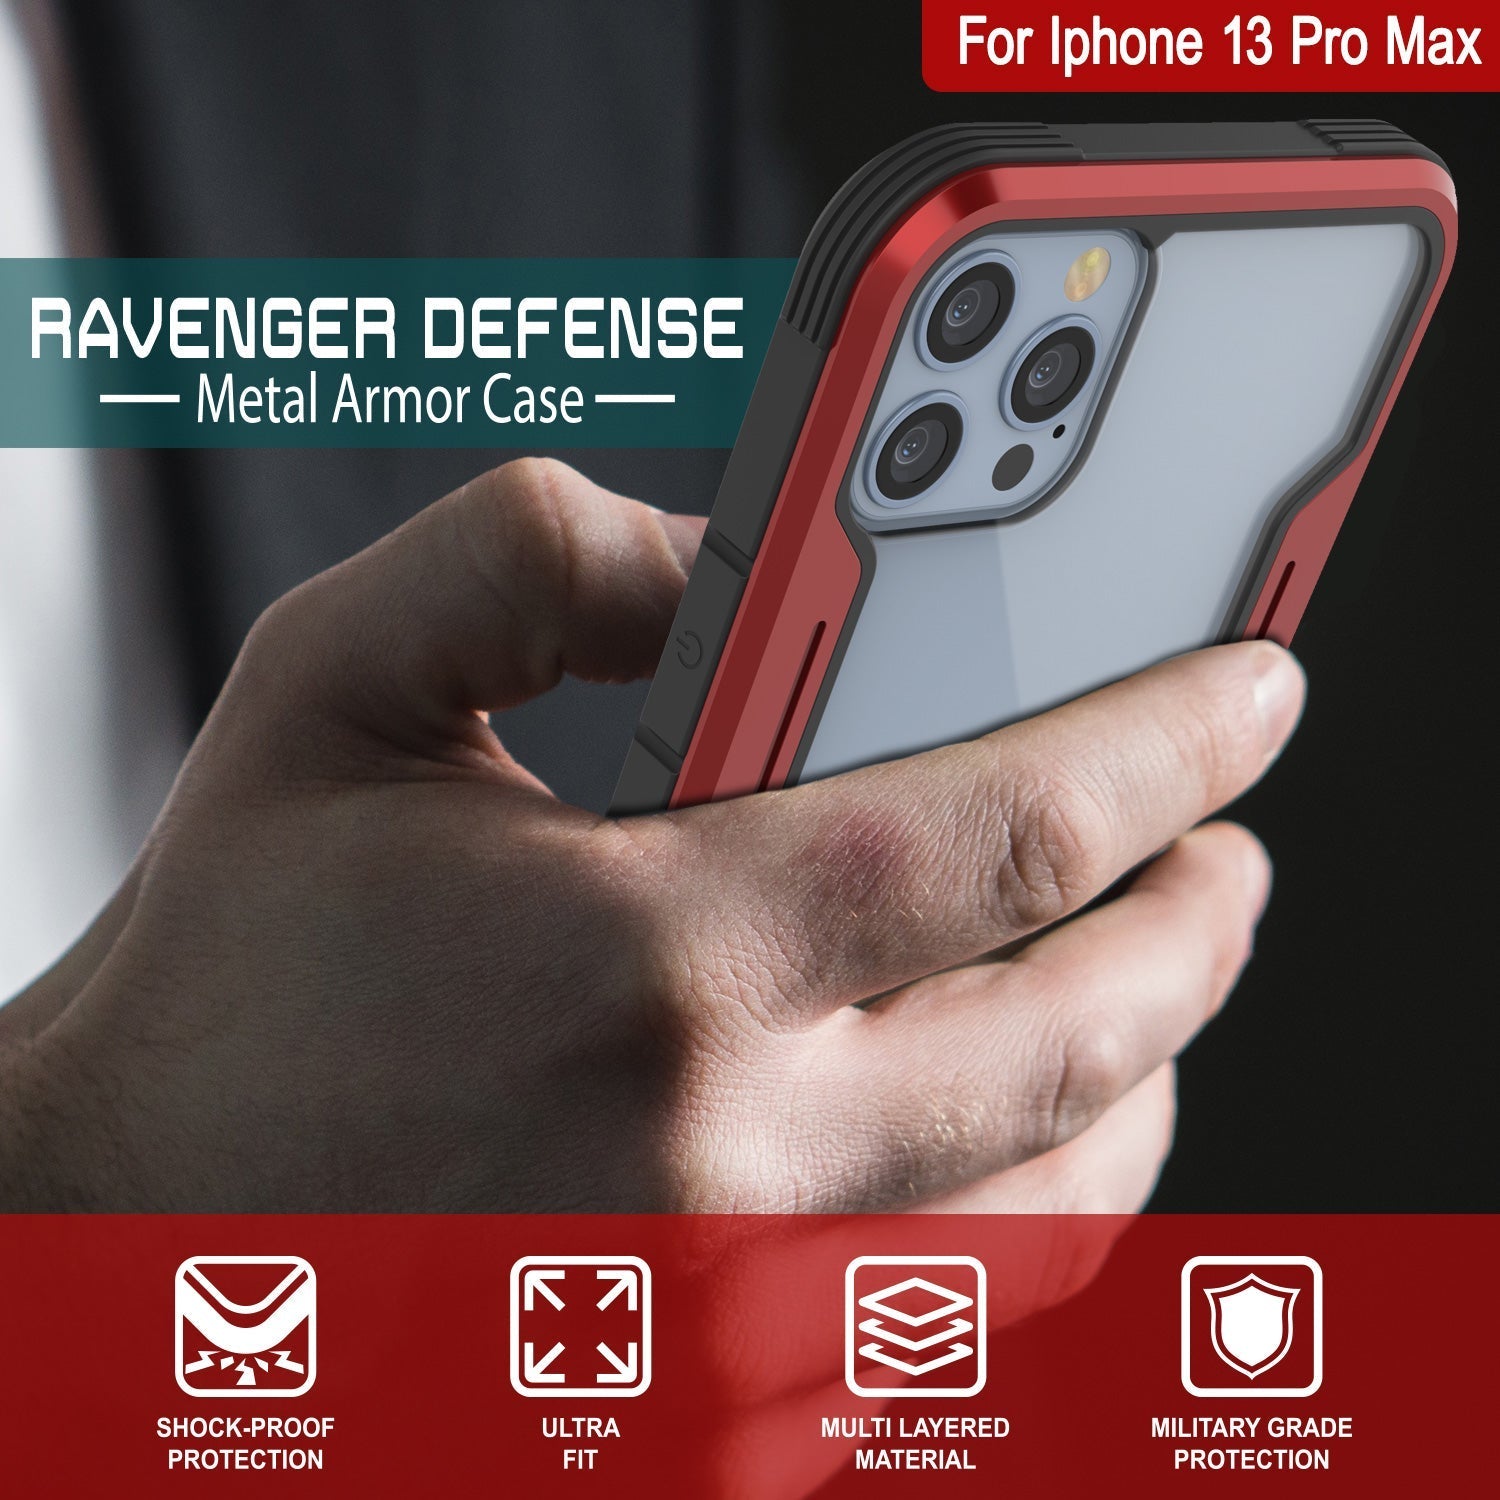 Punkcase iPhone 14 Pro Max Ravenger MAG Defense Case Protective Military Grade Multilayer Cover [Red]